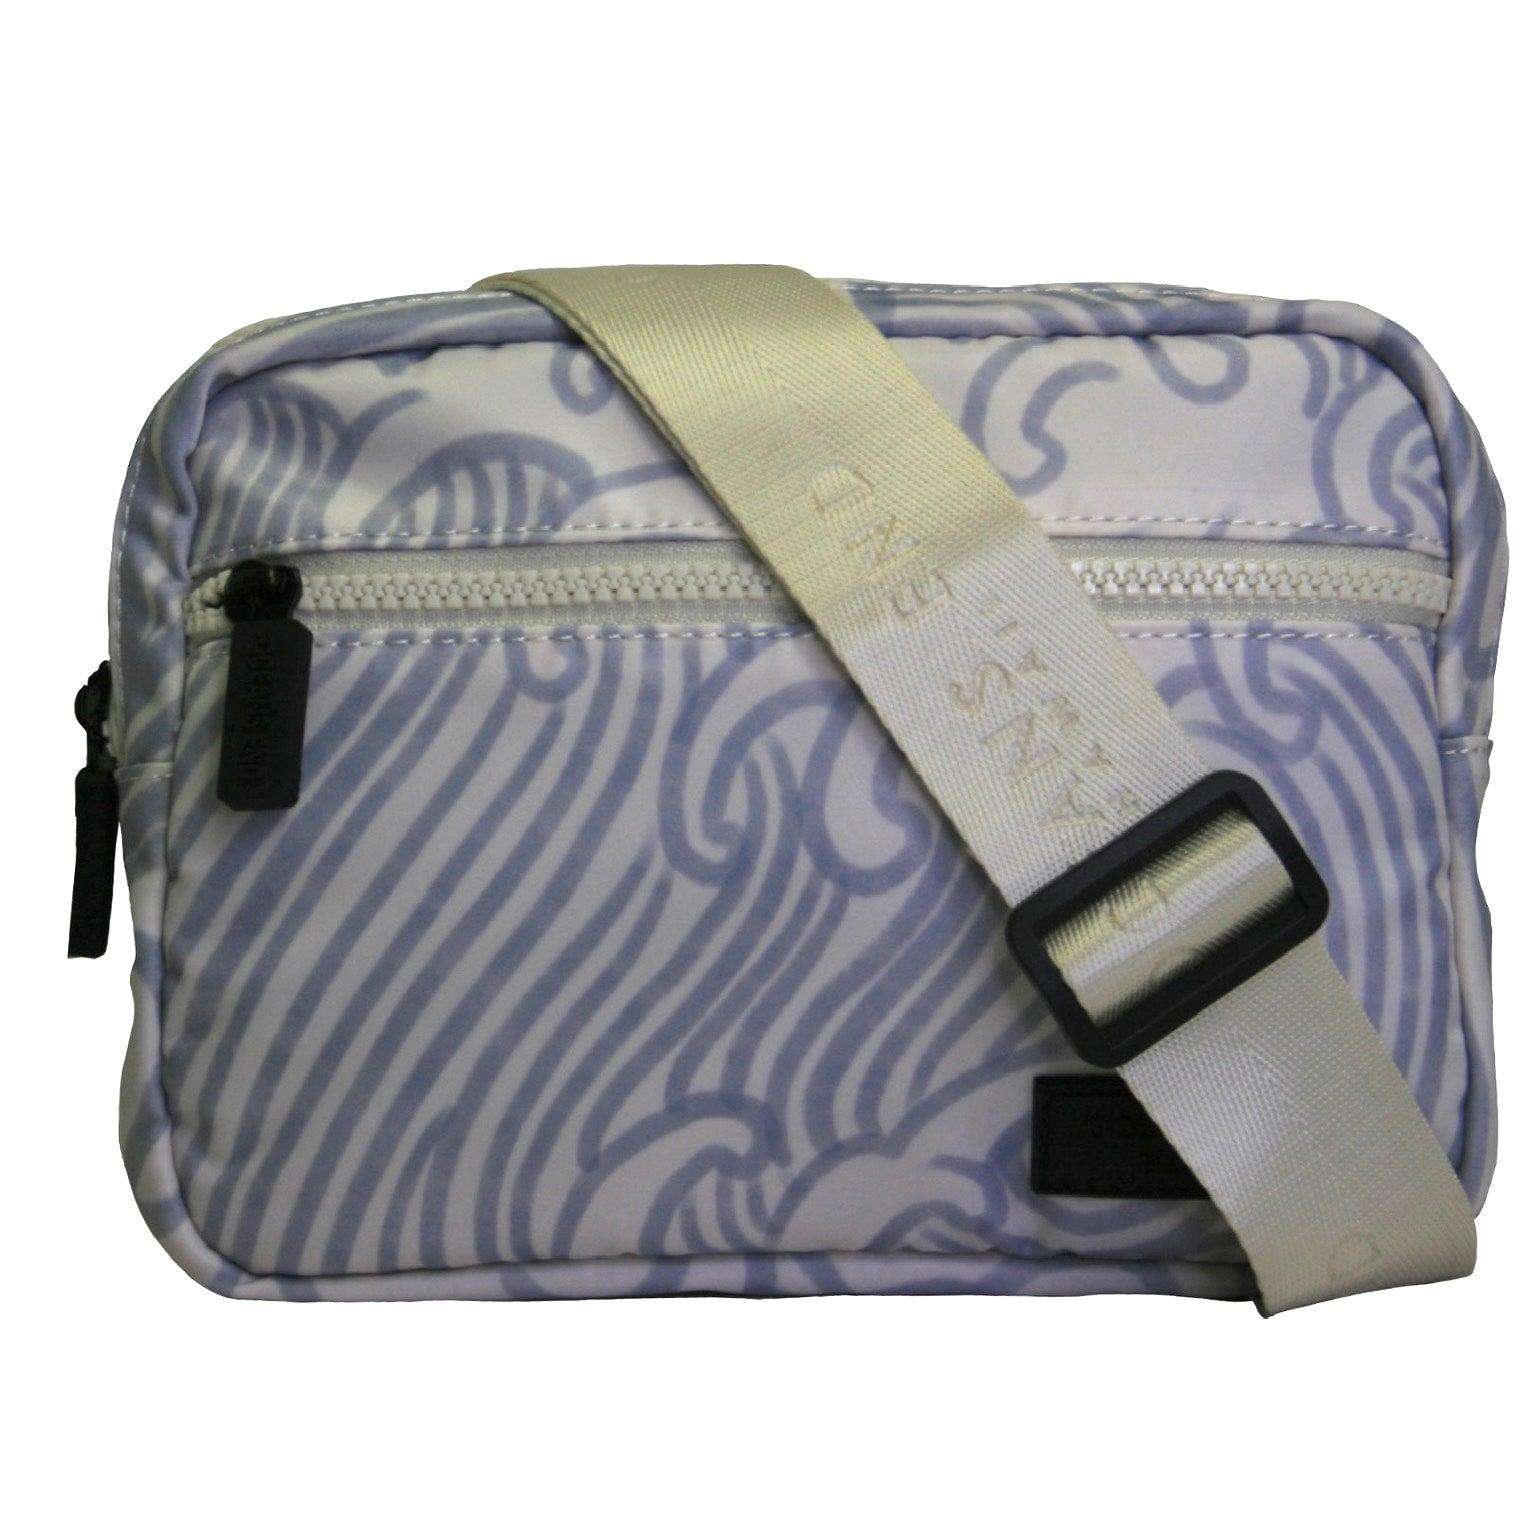 white and blue wave fanny or hip pack with beige strap - Oceans End